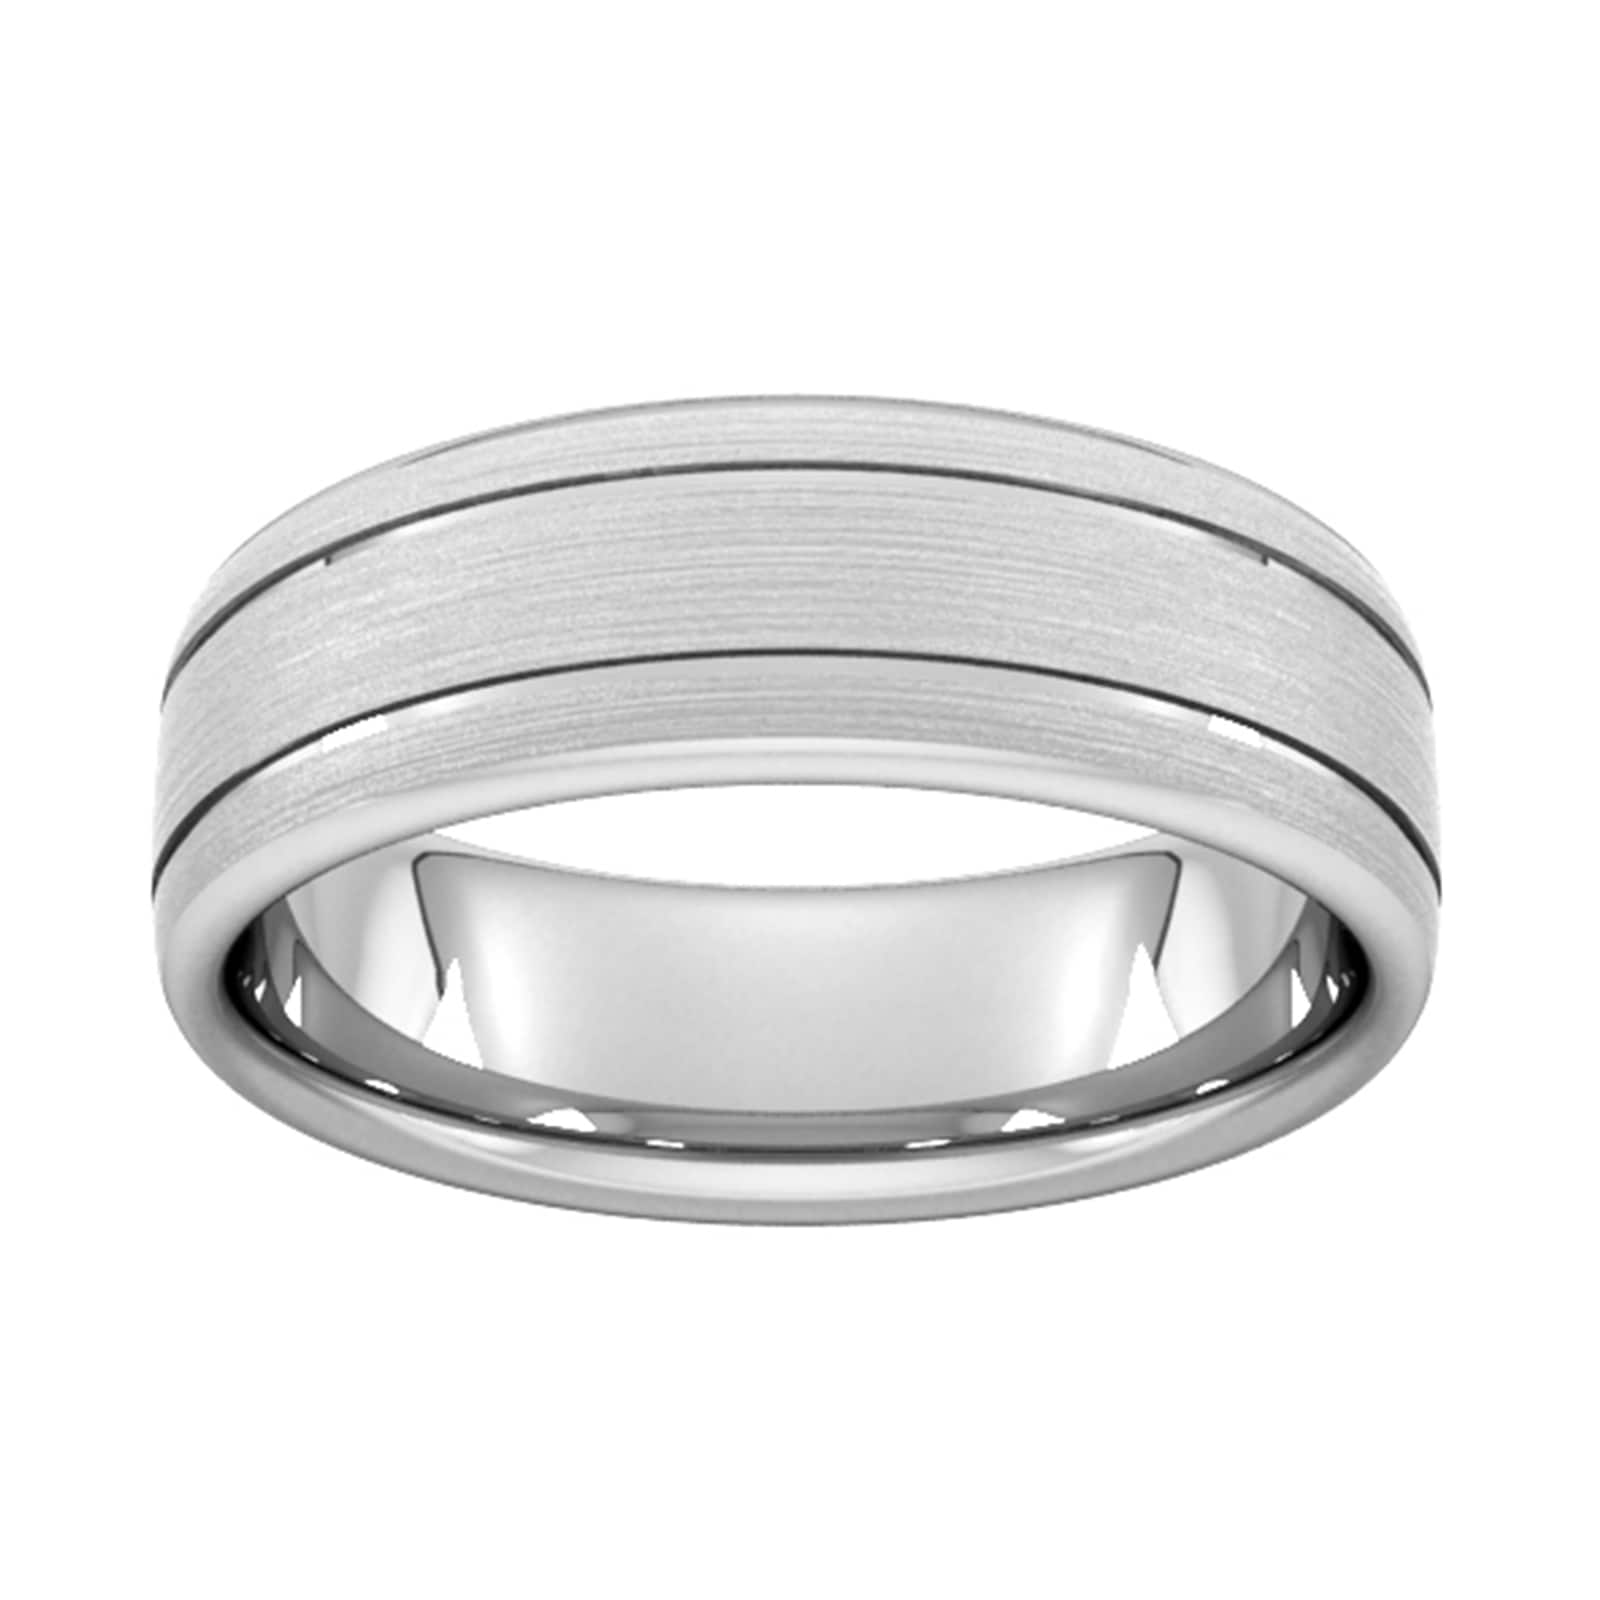 7mm Traditional Court Heavy Matt Finish With Double Grooves Wedding Ring In 18 Carat White Gold - Ring Size R